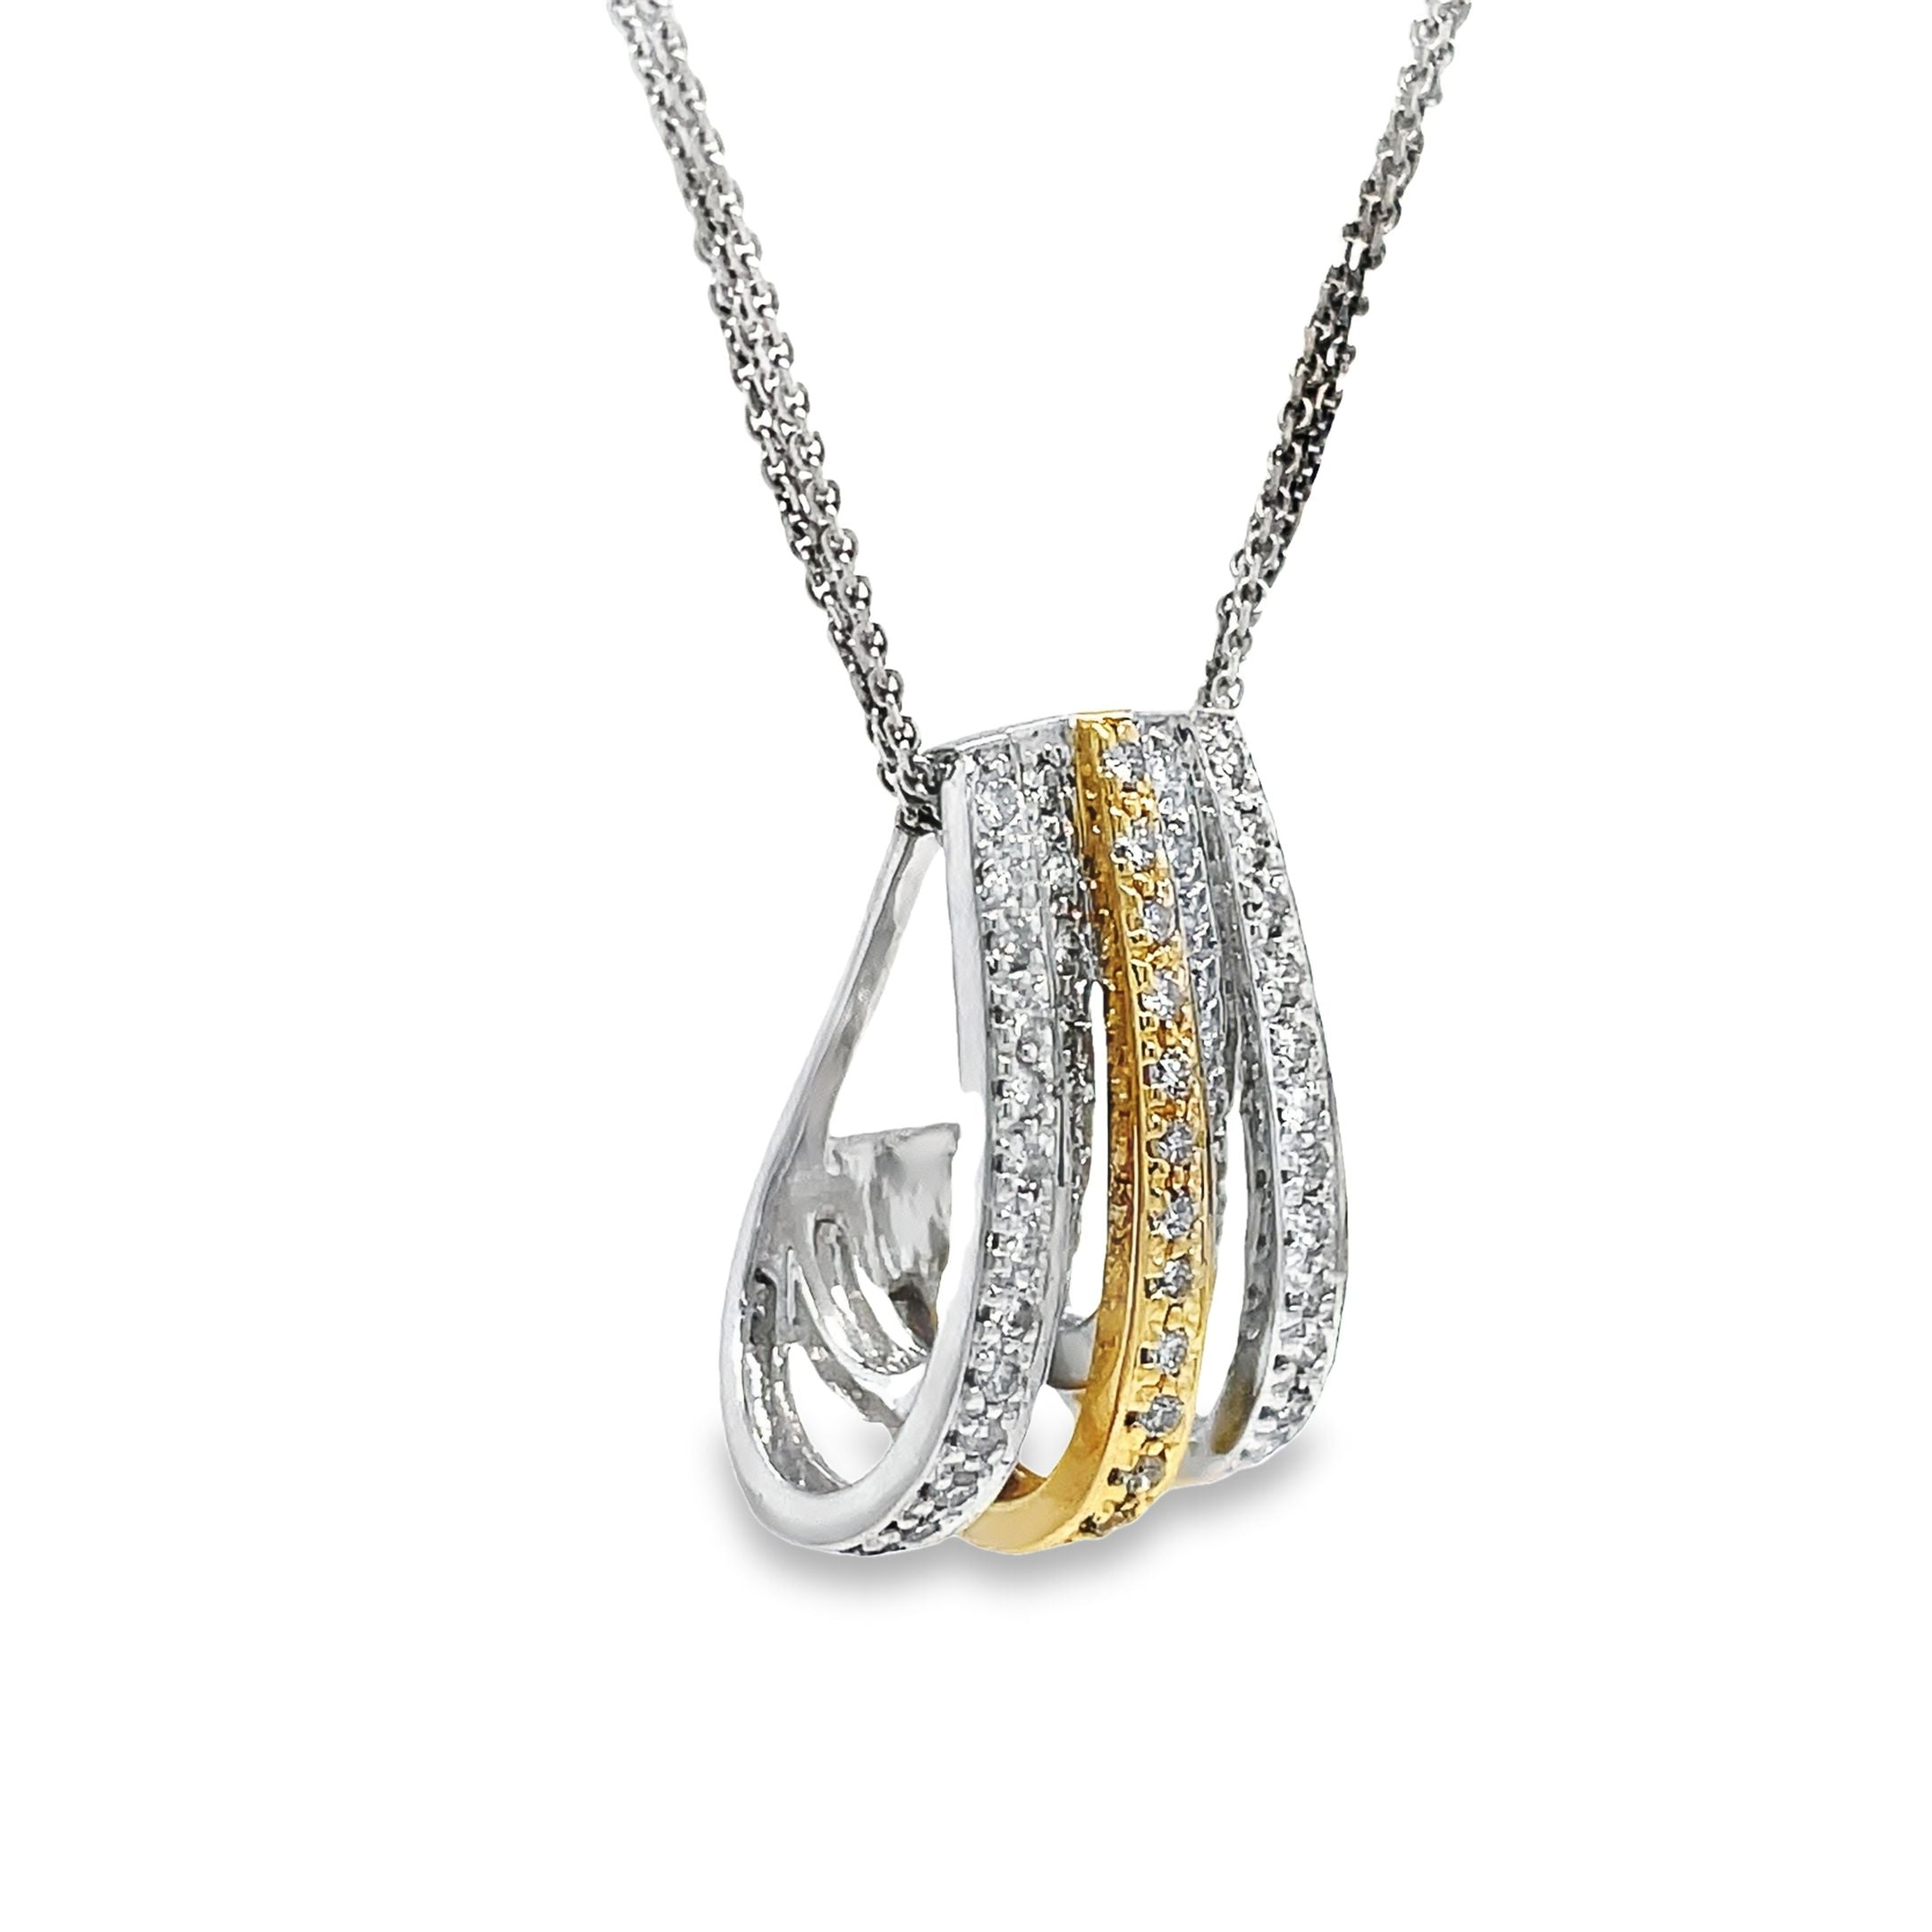 Expertly crafted with 1.10 carats of round diamonds, this Two Tone Slider Pendant Necklace is a stunning addition to any jewelry collection. Made with 14k white gold and a three diamond cut 16" chain, this necklace also features a 2" extension for a customizable fit. Elevate any look with the 1" pendant for a touch of elegance and sophistication.